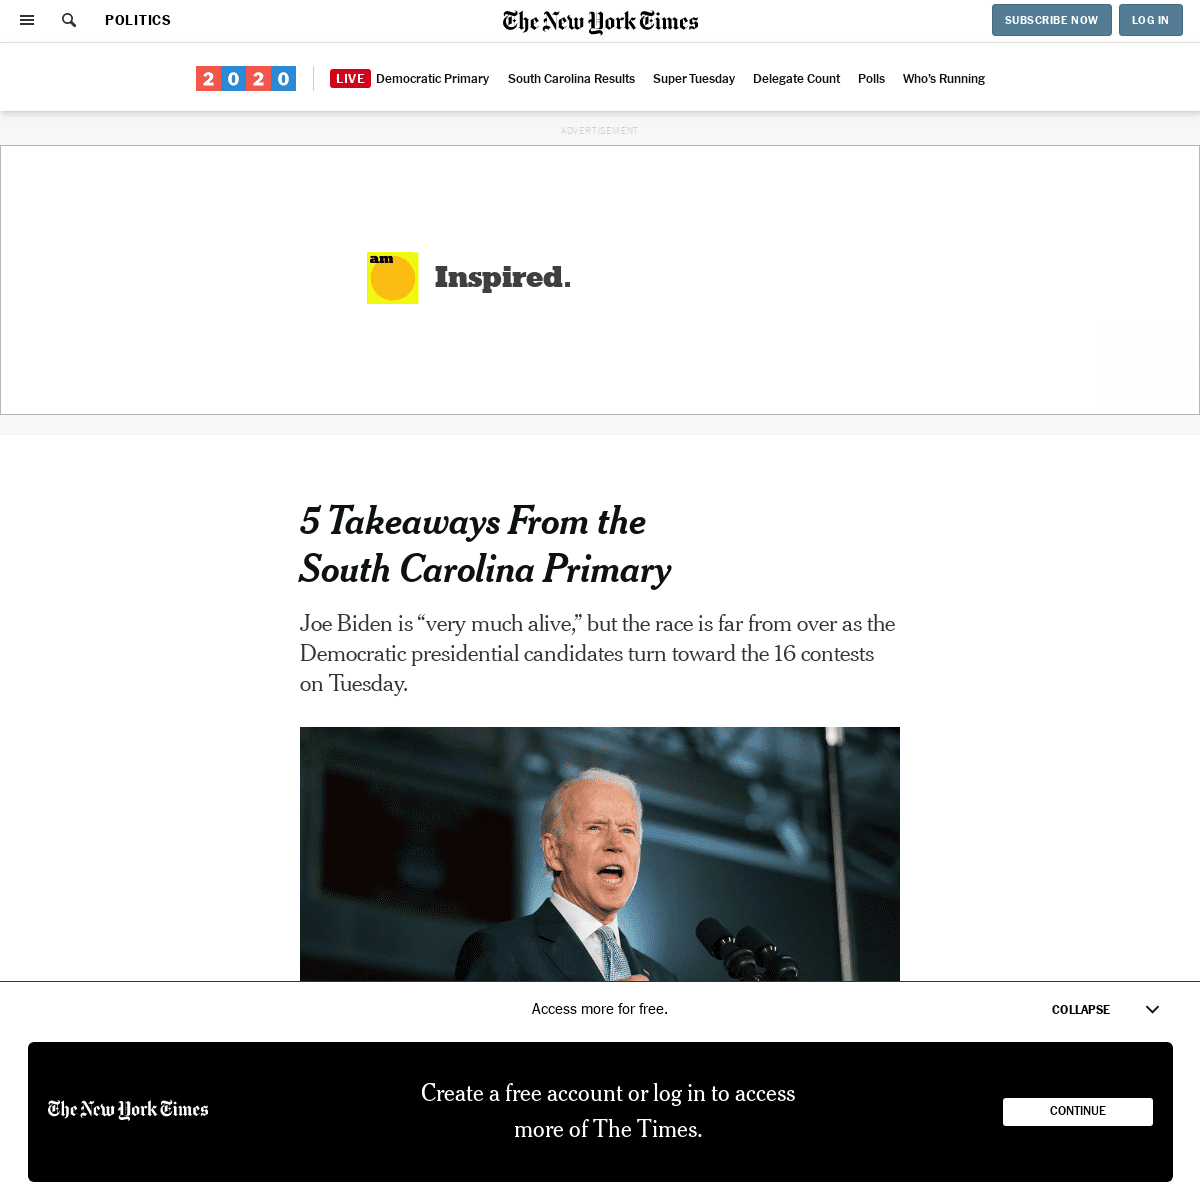 A complete backup of www.nytimes.com/2020/03/01/us/politics/sc-primary-biden.html